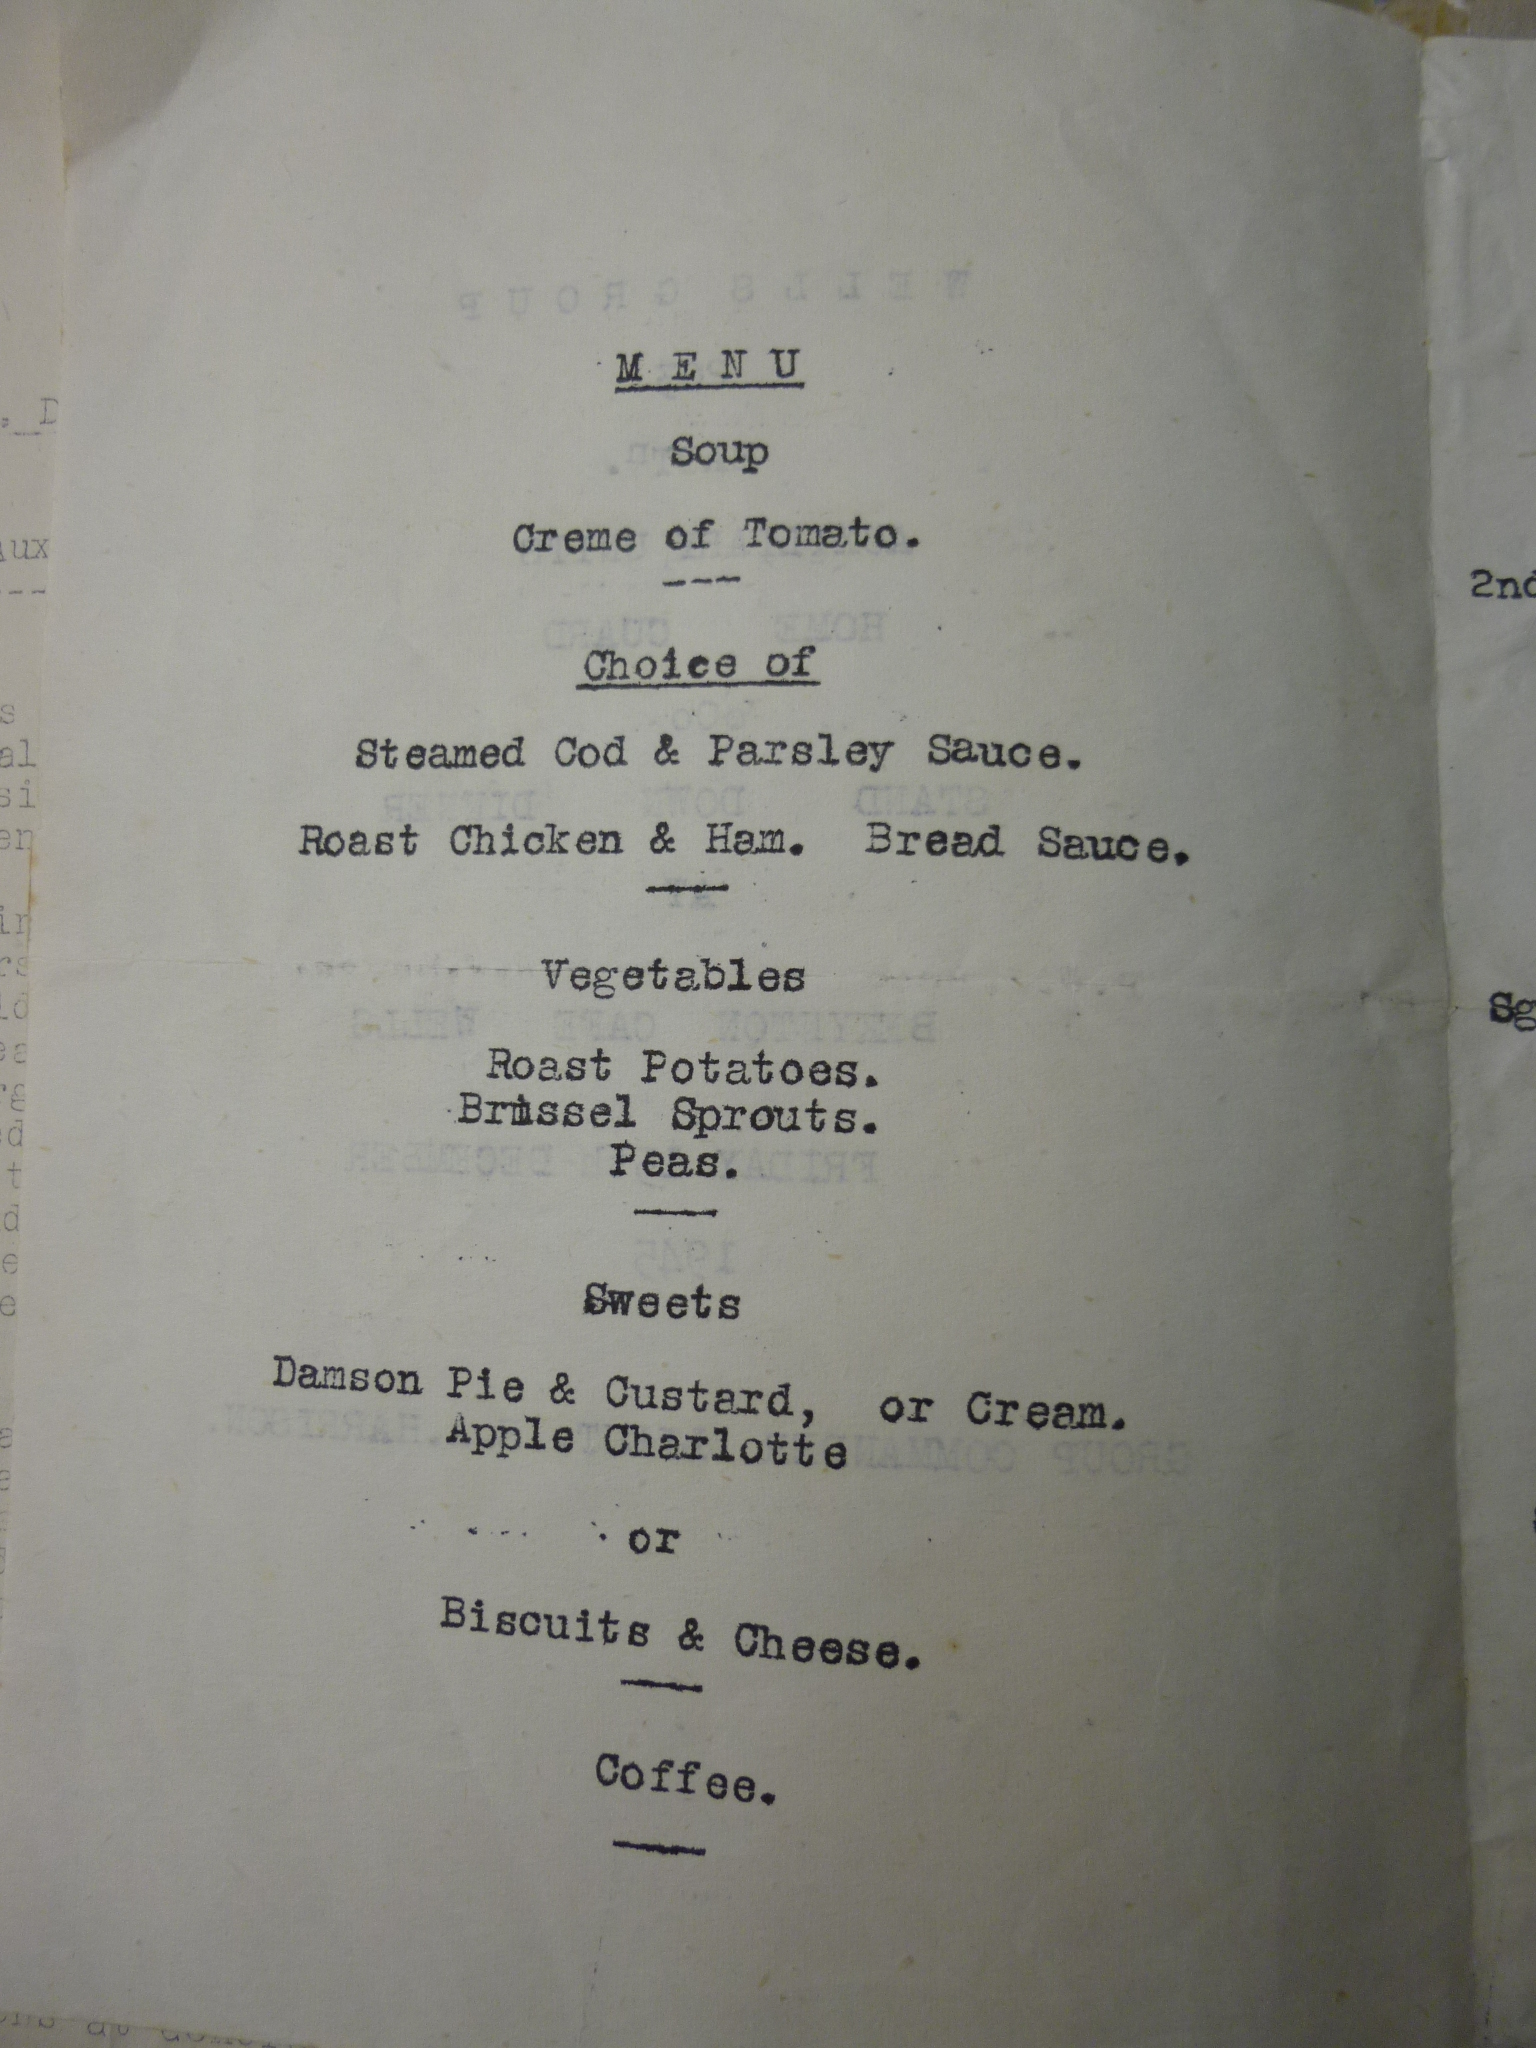 Somerset Wells stand down menu 2 (from John Sealy)